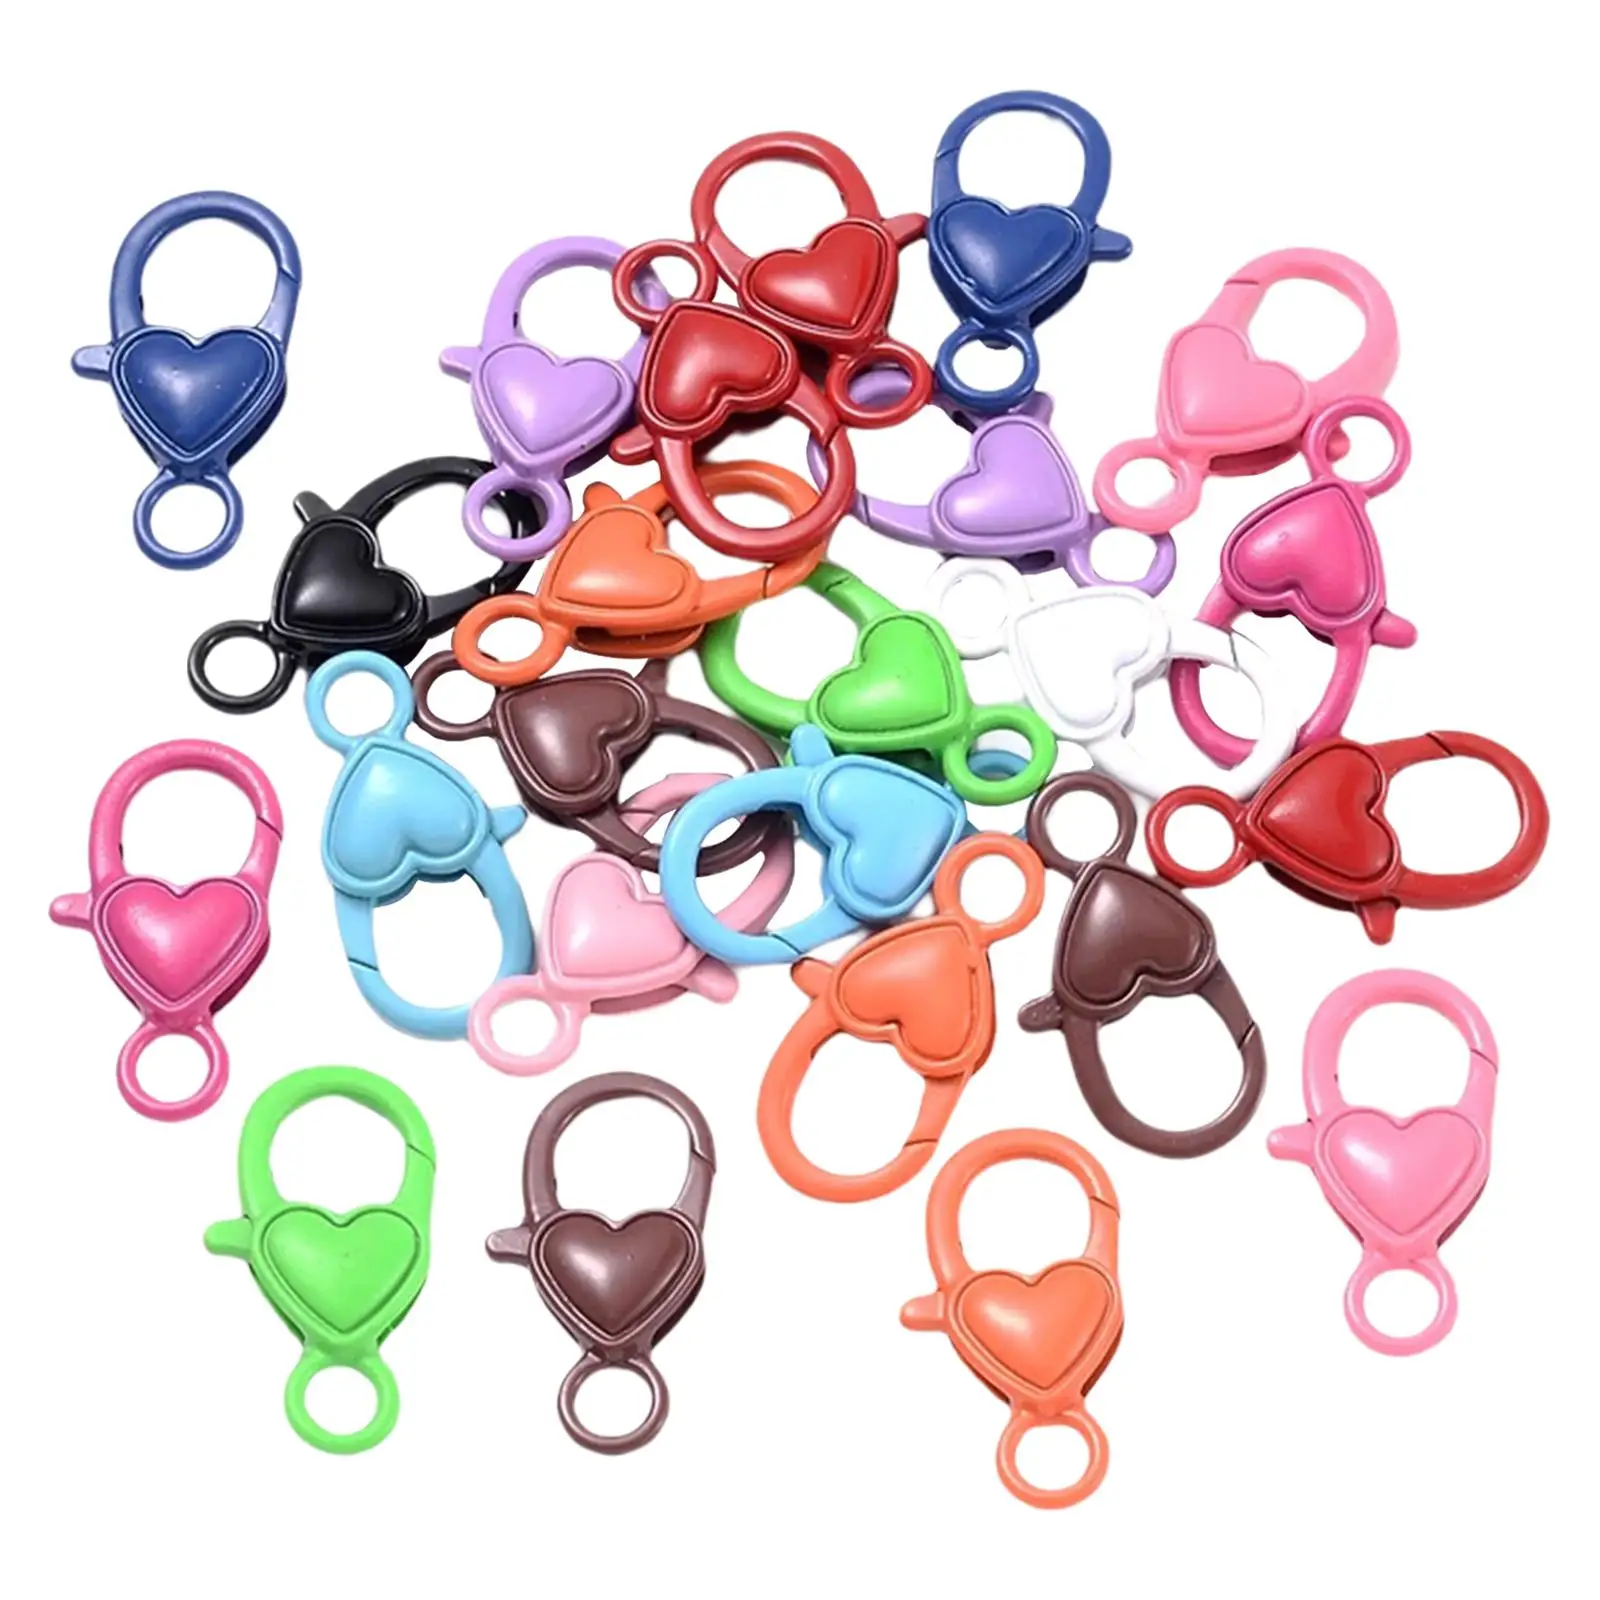 100 Pieces Retro Style  Lobster Clasp Key  Buckle Lobster Clasp Hard Connector  Jewelry Making DIY Key Sewing